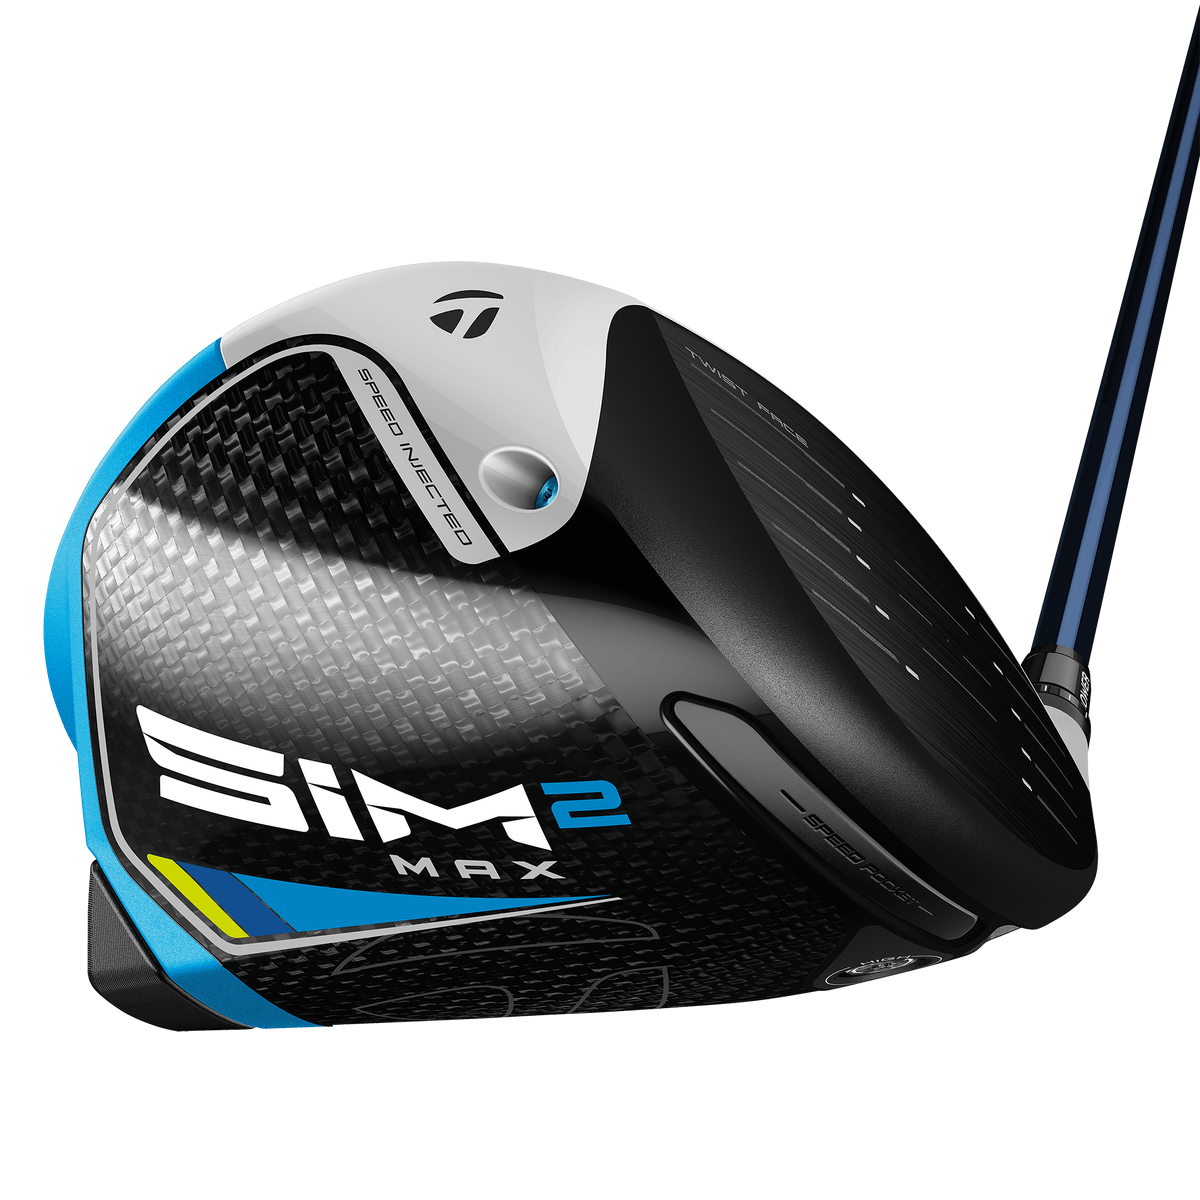 TaylorMade SIM2 Max Driver | Curated.com